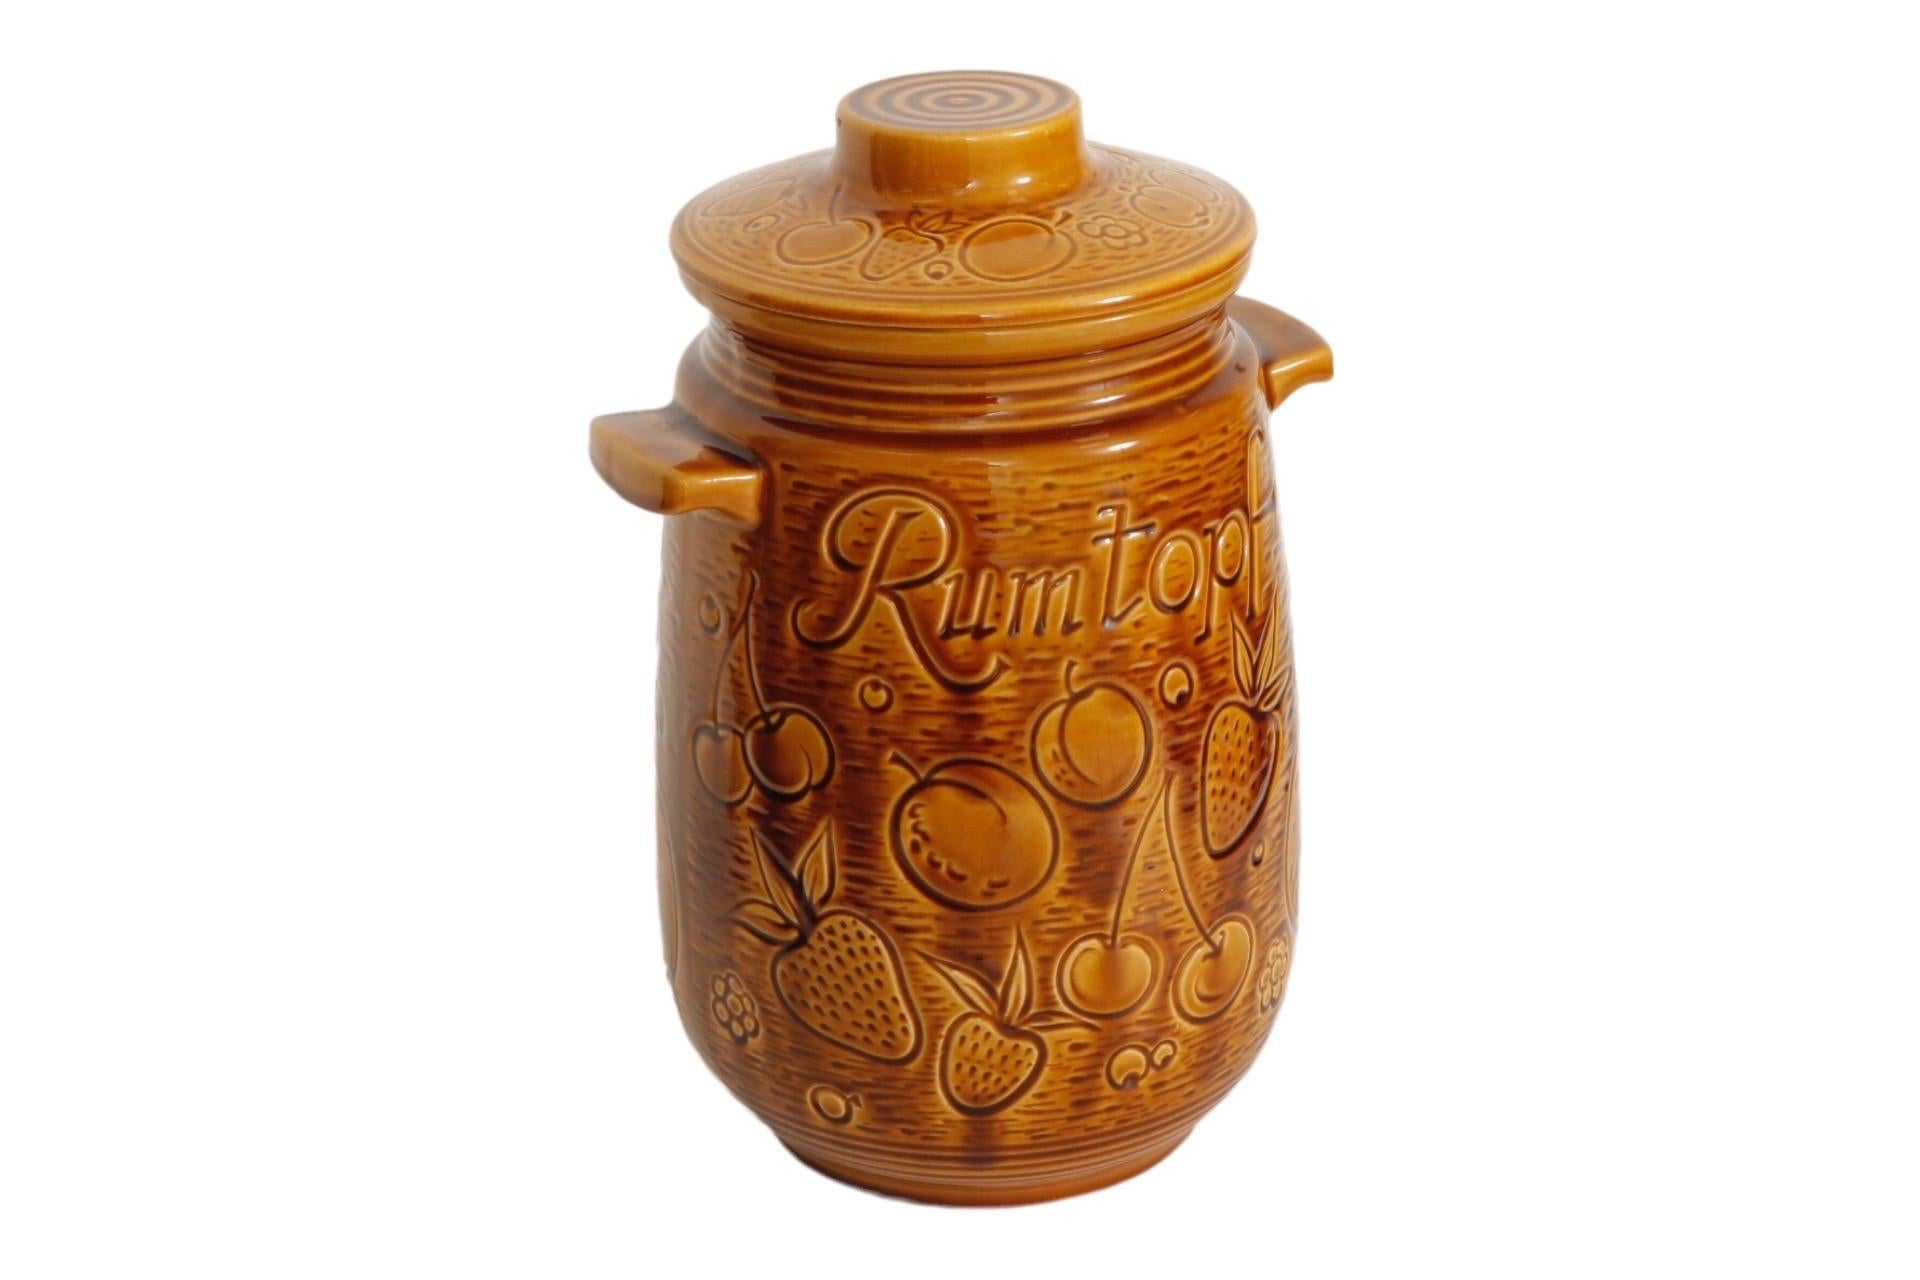 An original Scheurich Keramik Rumtopf pot. Decorated with various summer fruit designs which run all the way around the pot and on the lid. Rumtopf is written on both sides and the pot is finished in a glazed golden-brown. The Scheurich pottery mark